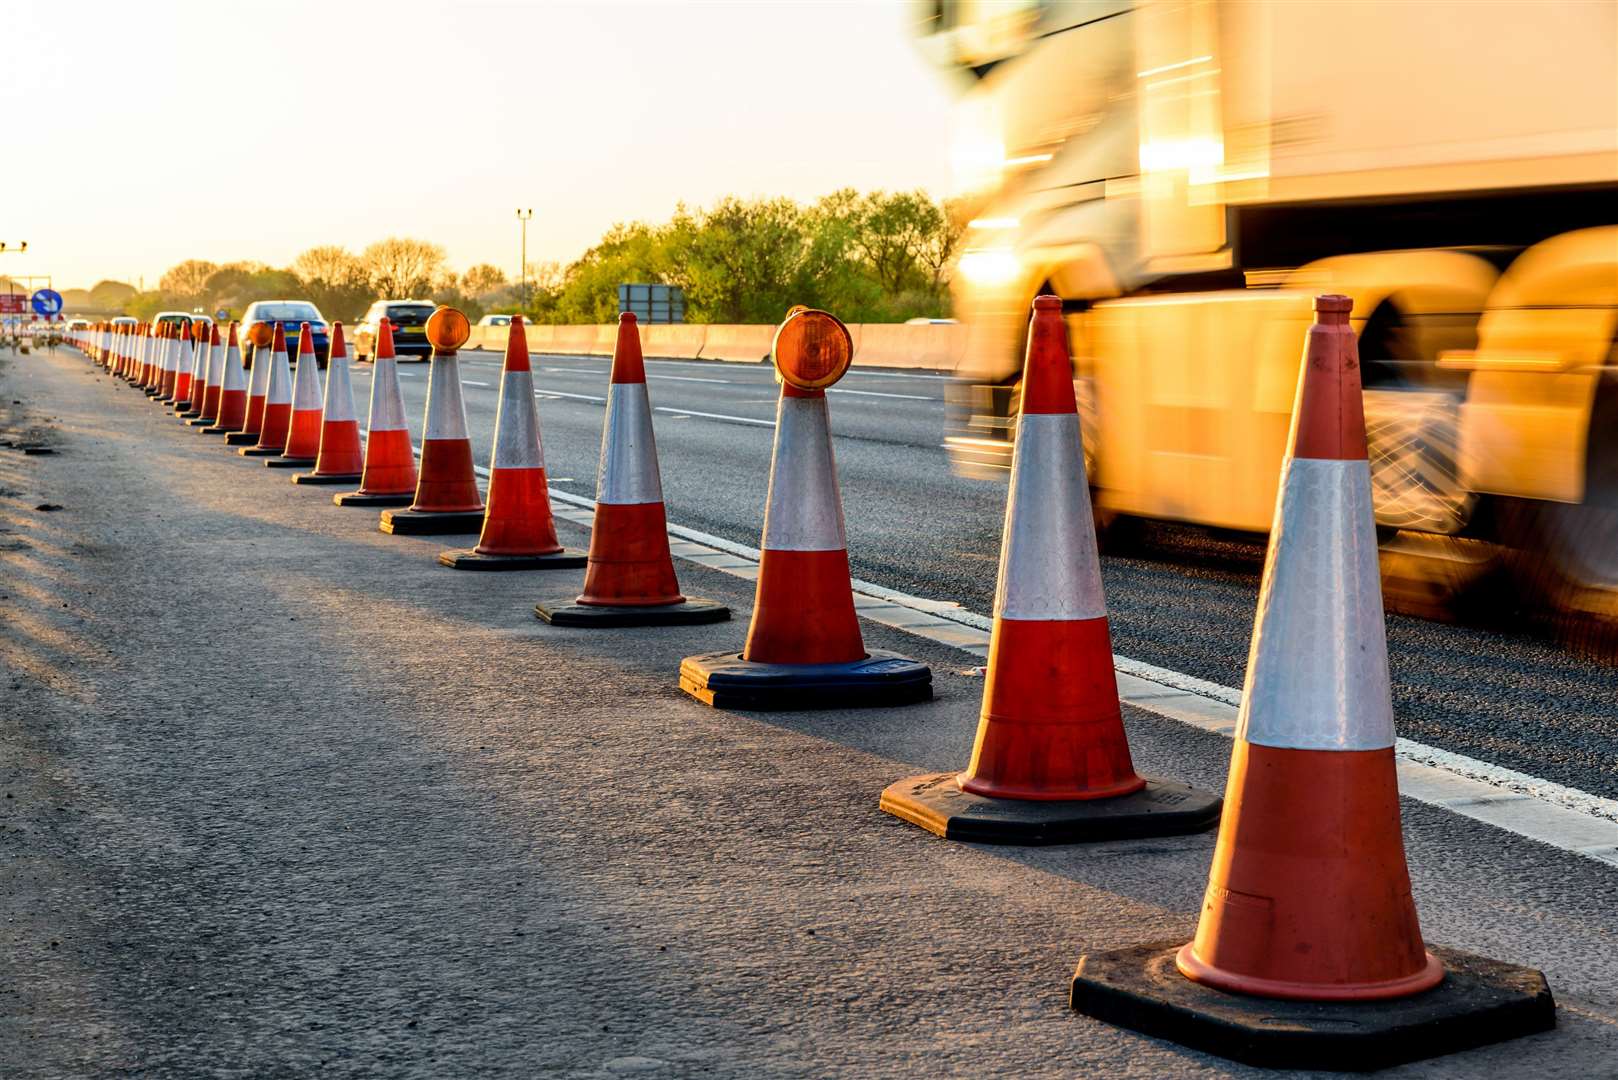 Millions of people are expected to be on the roads over the bank holday. Image: iStock.